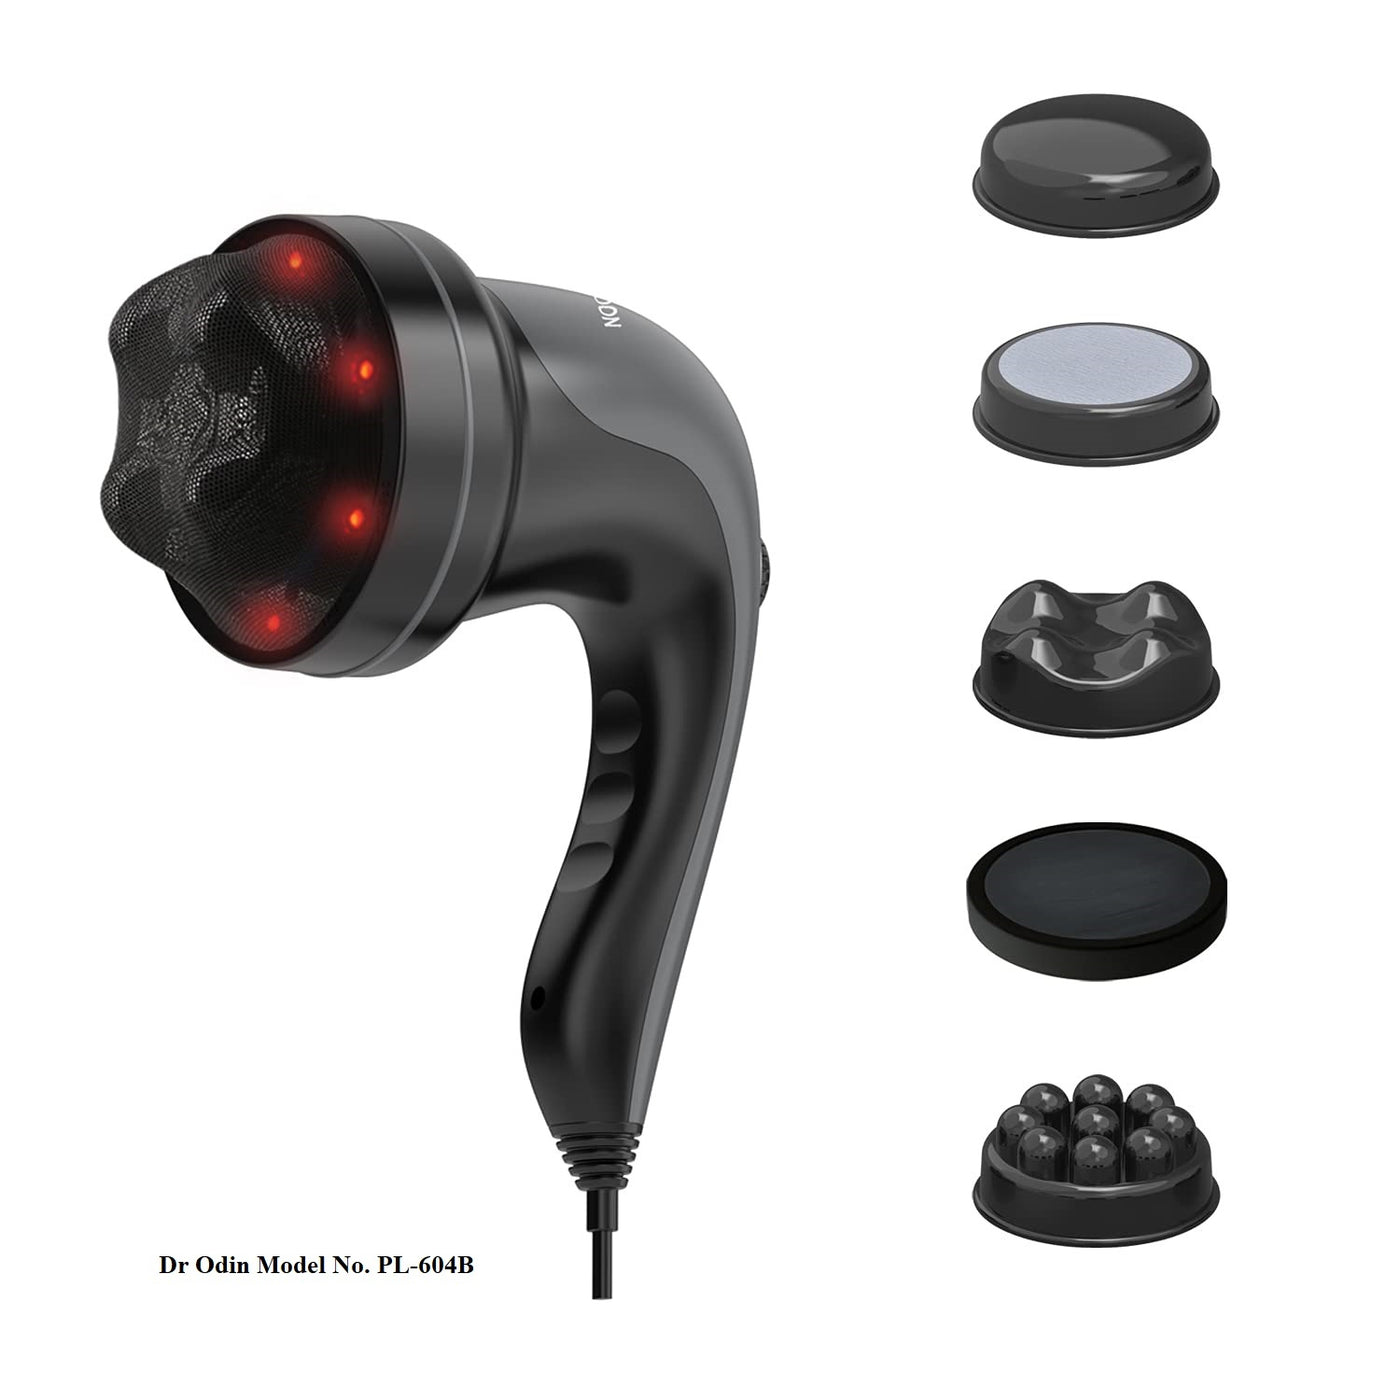 Waldon Electrical Body Massager with Interchangeable 4 Massager Heads PL-604B Dr Odin